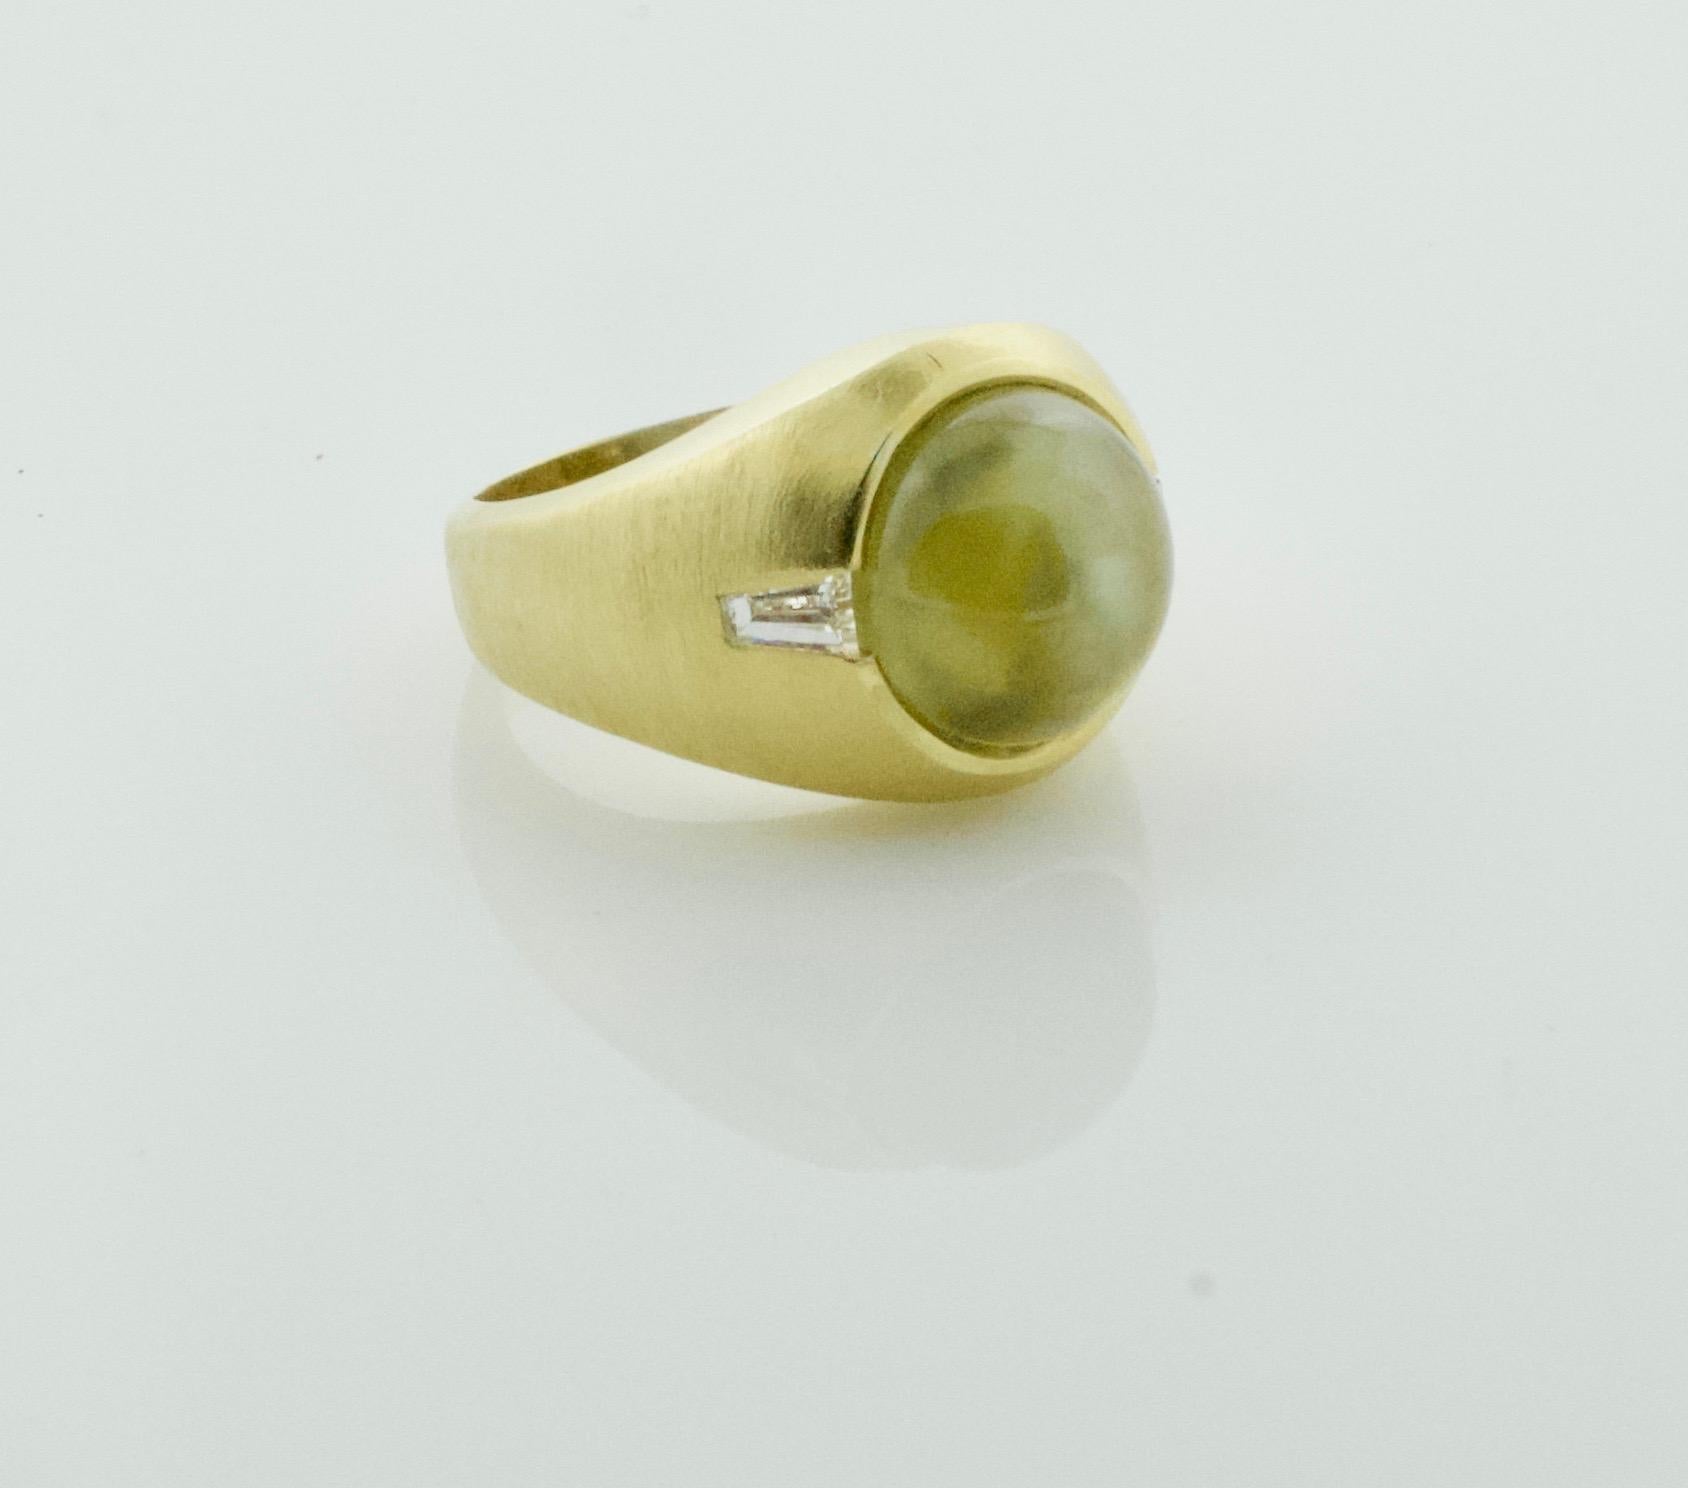 Chrysoberyl Cats Eye 11.10 Carats and Diamond Ring in 18k
Two Tapered Baguette Diamonds Weigh .37 [GH VVS]
Currently Size9 Can Be Sized By Us Or Your Qualified Jeweler
A Ultimate Pinky Ring 